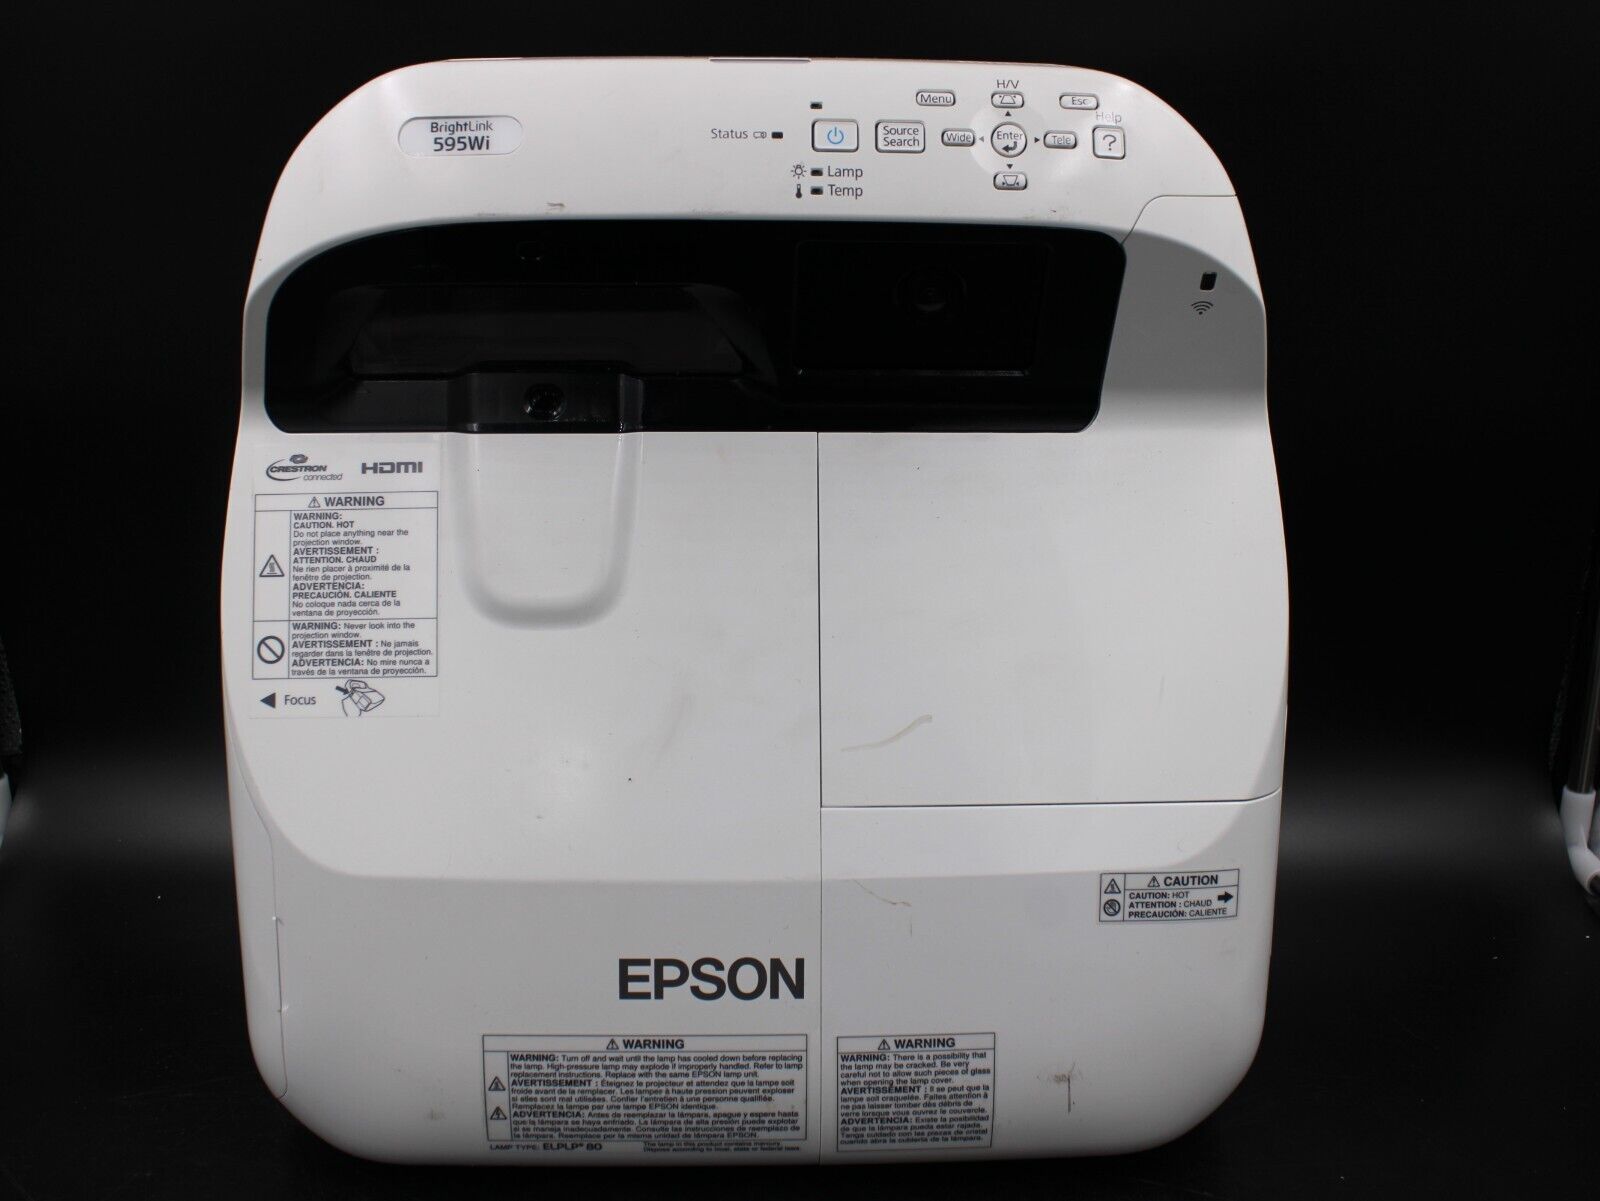 Epson BrightLink 595WI WXGA 3300 Lumens Projector 0-499 Lamp Hours TESTED